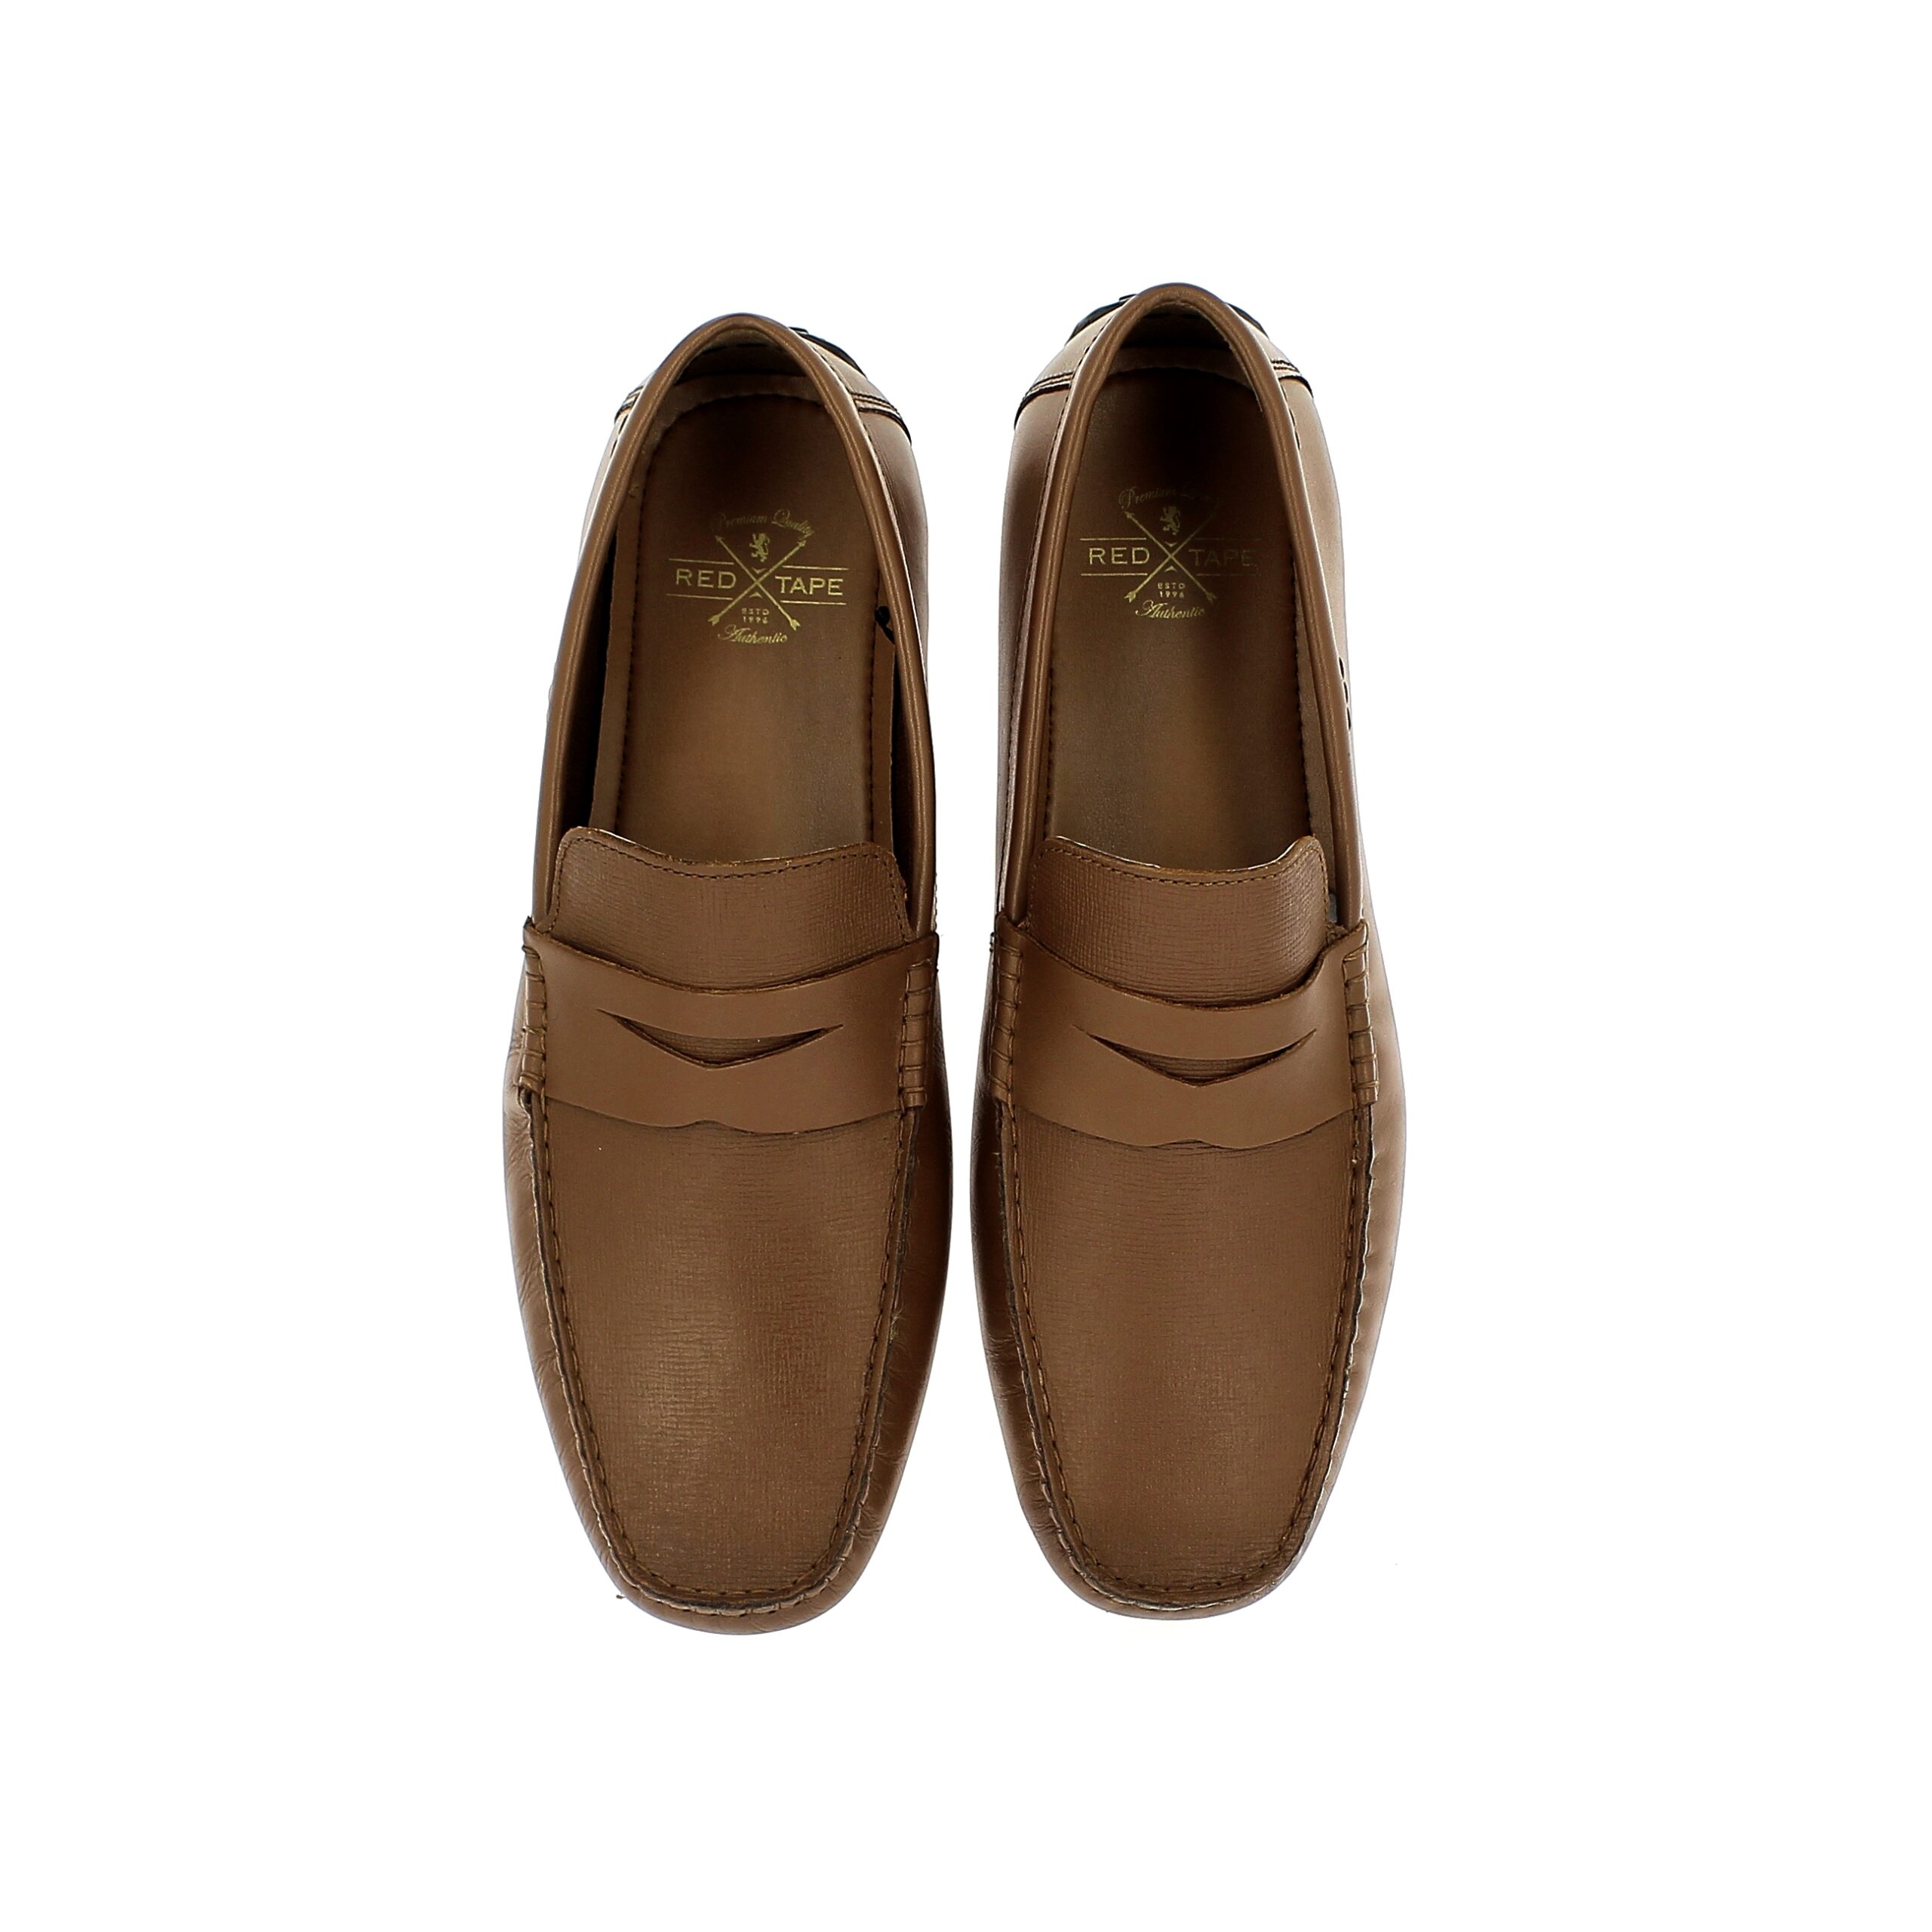 Red Tape MENS SHOES TAN | DSI Footcandy